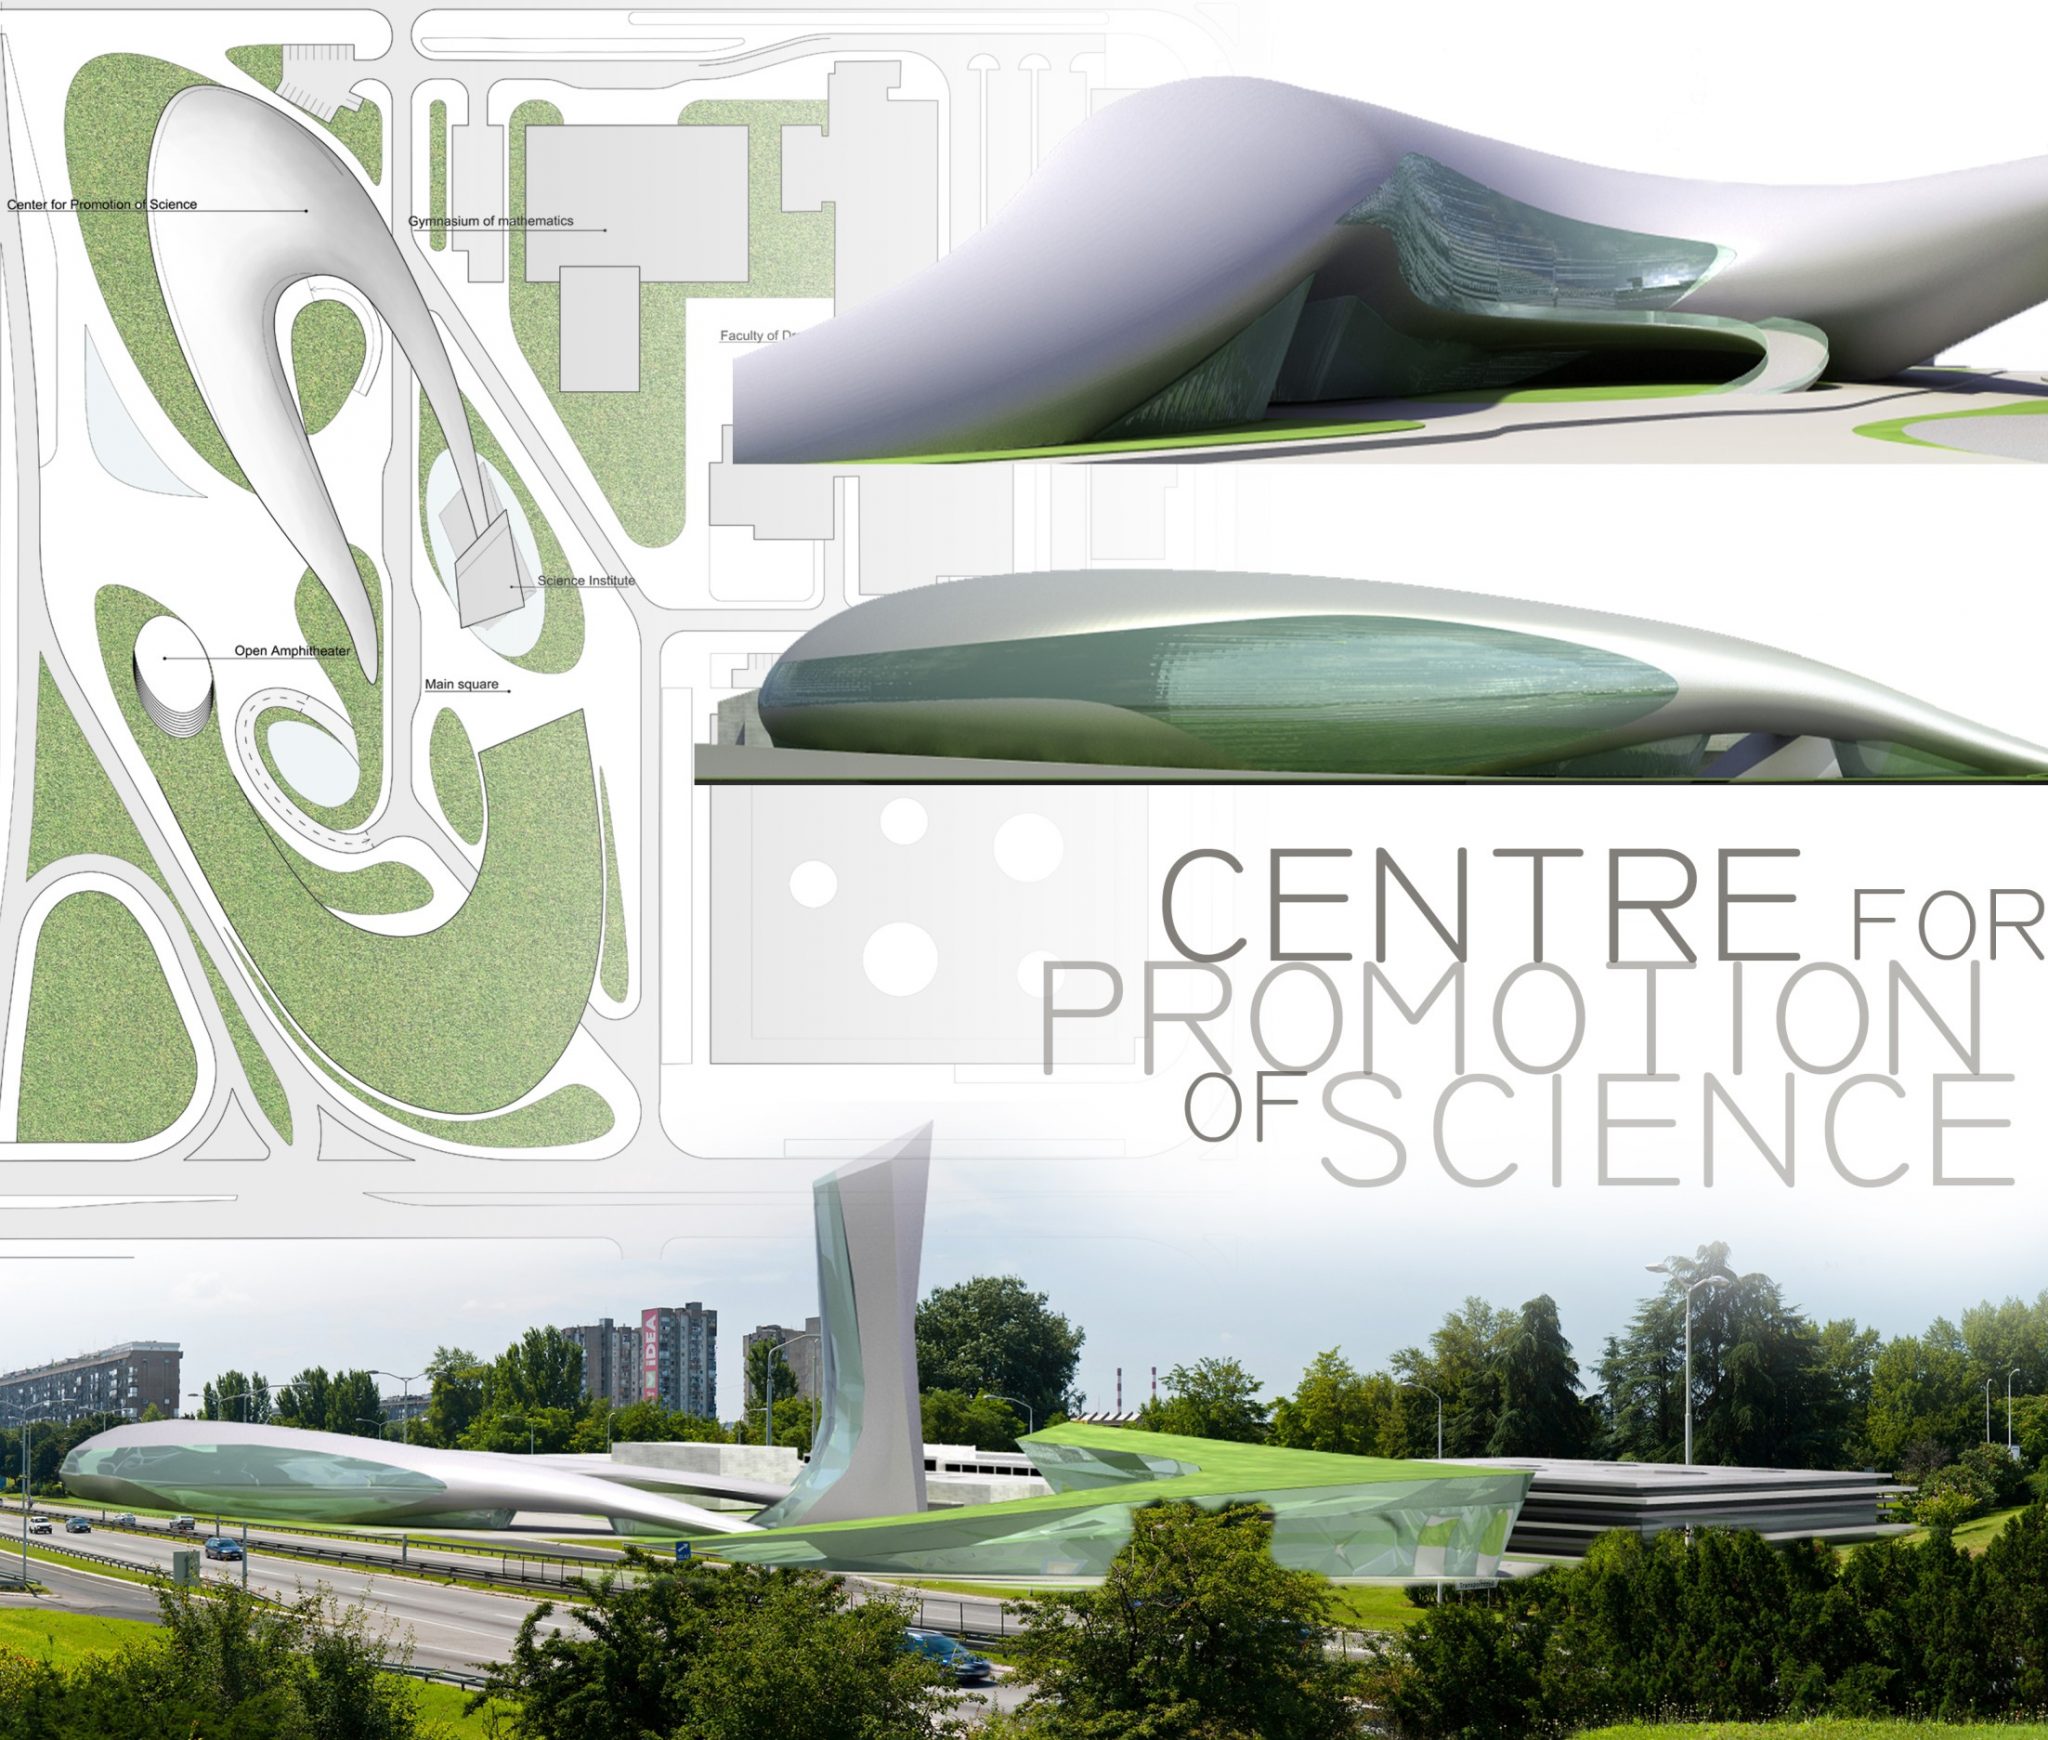 Centre for Promotion of Science, Belgrade, Serbia, 2010